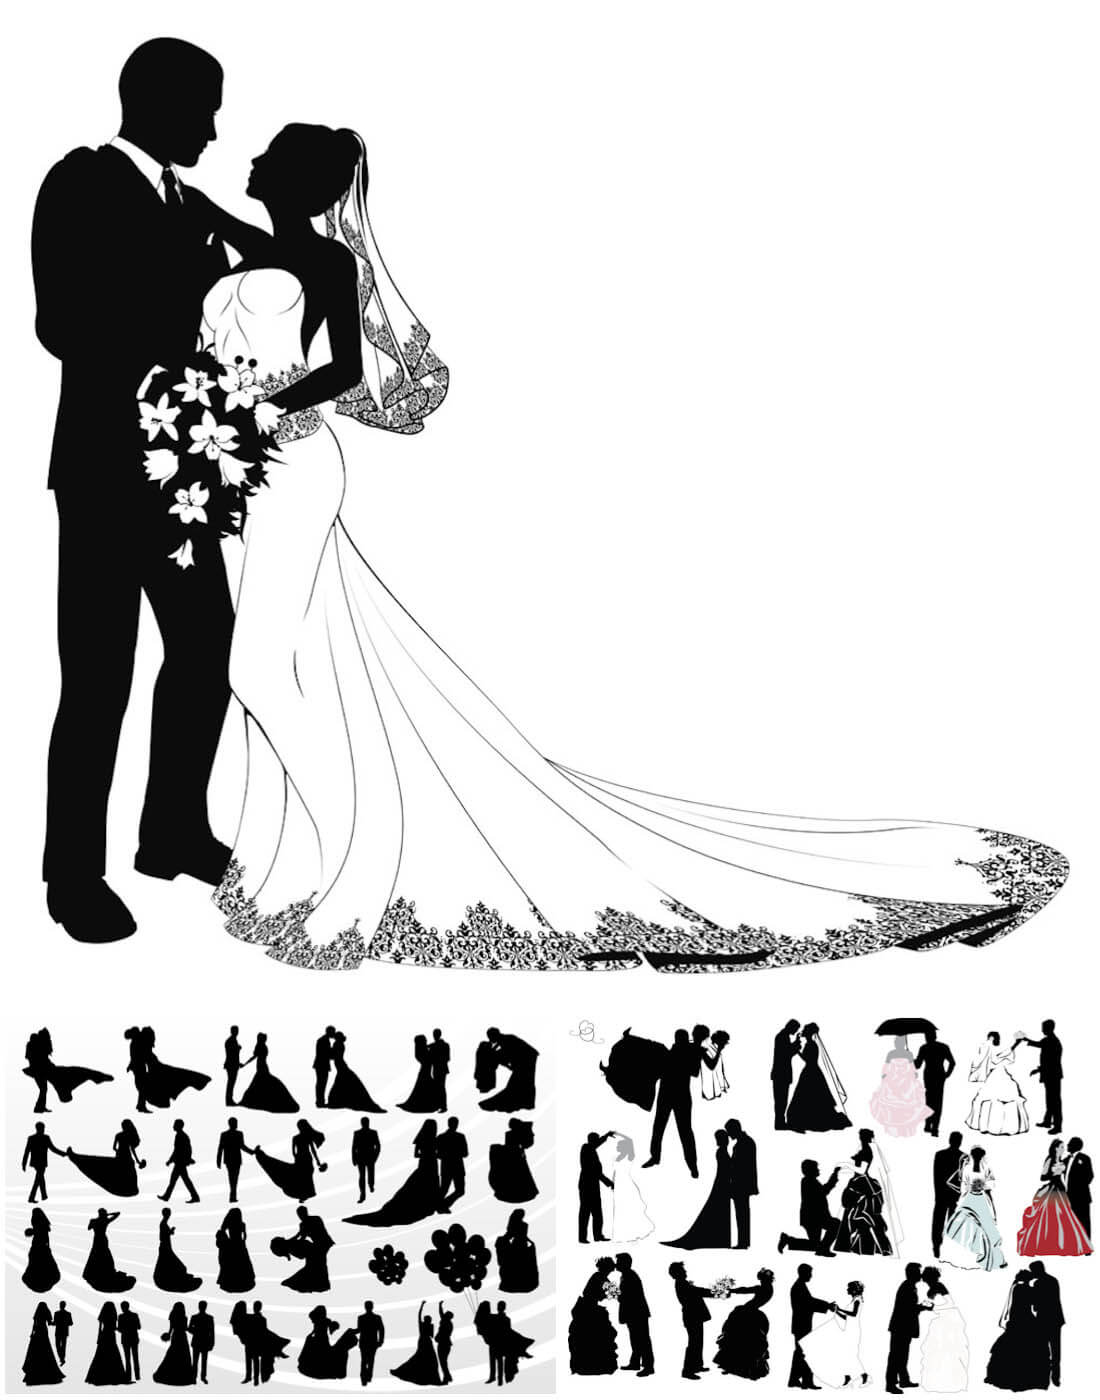 wedding clipart vector free download - photo #30